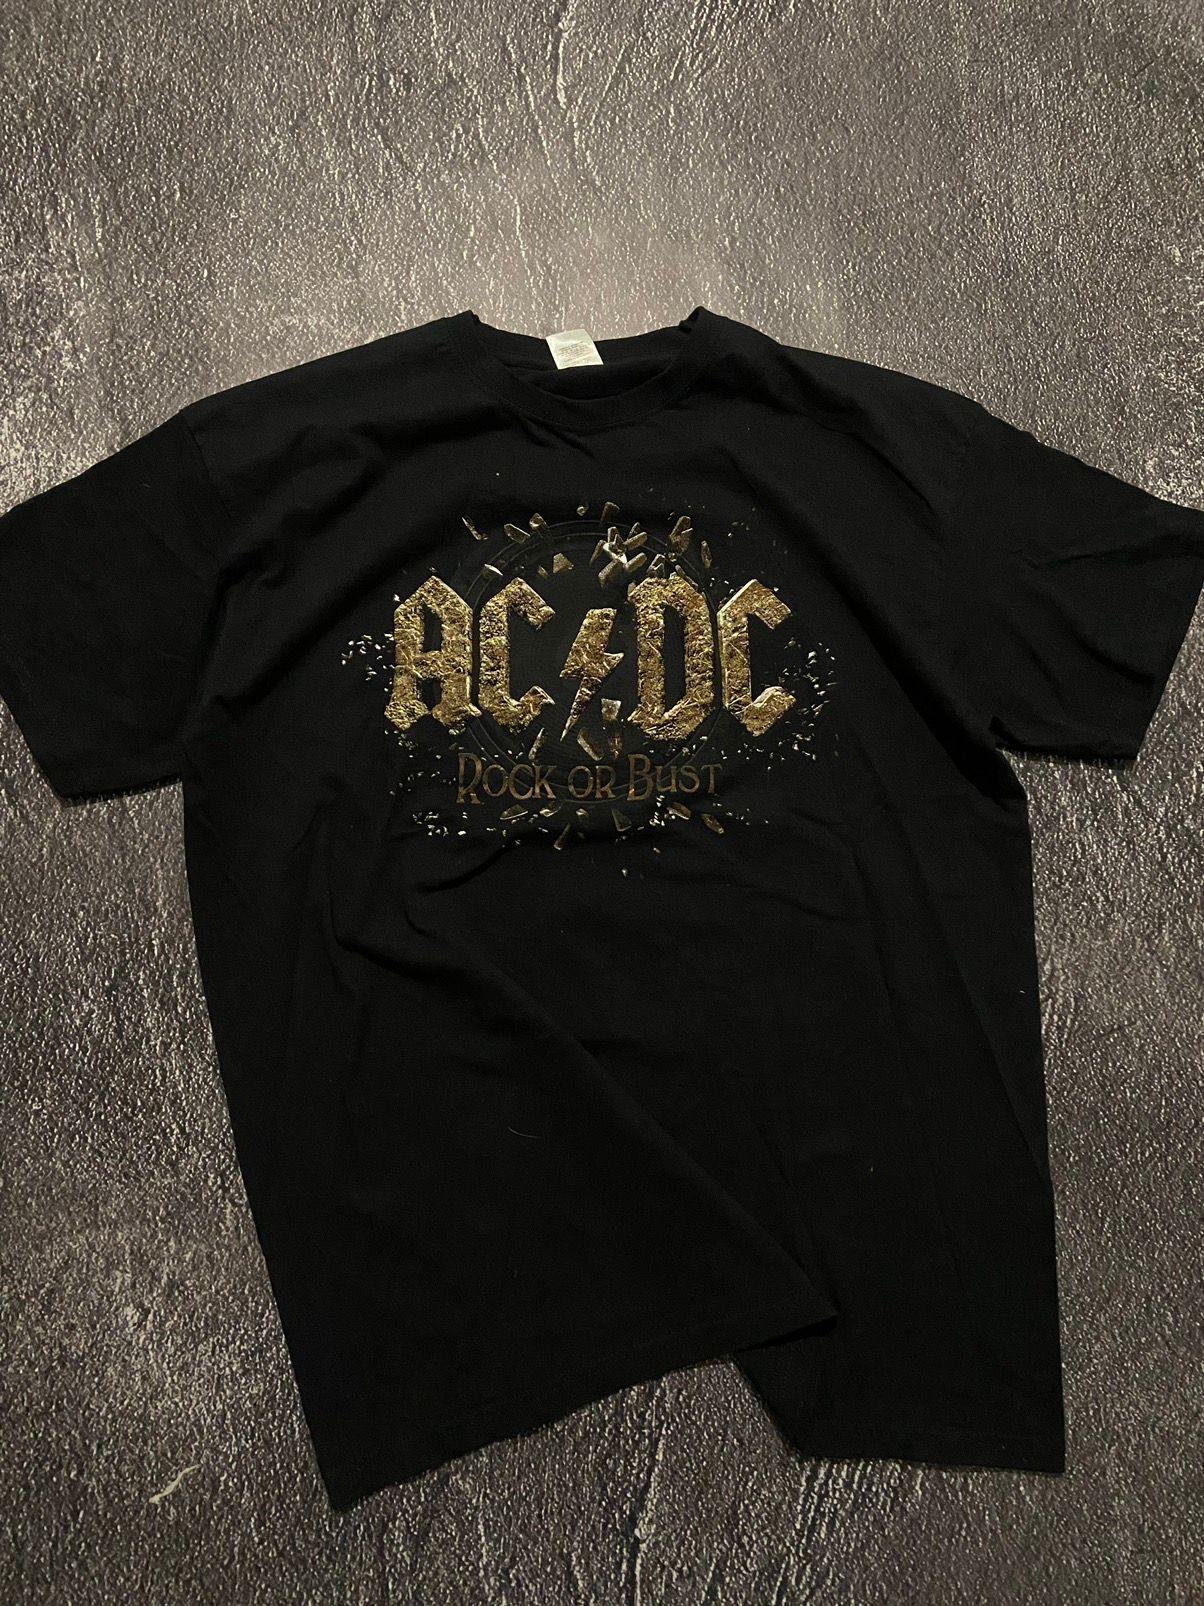 Pre-owned Acdc X Band Tees Ac/dc Rock Or Bust World Tour T Shirt In Black